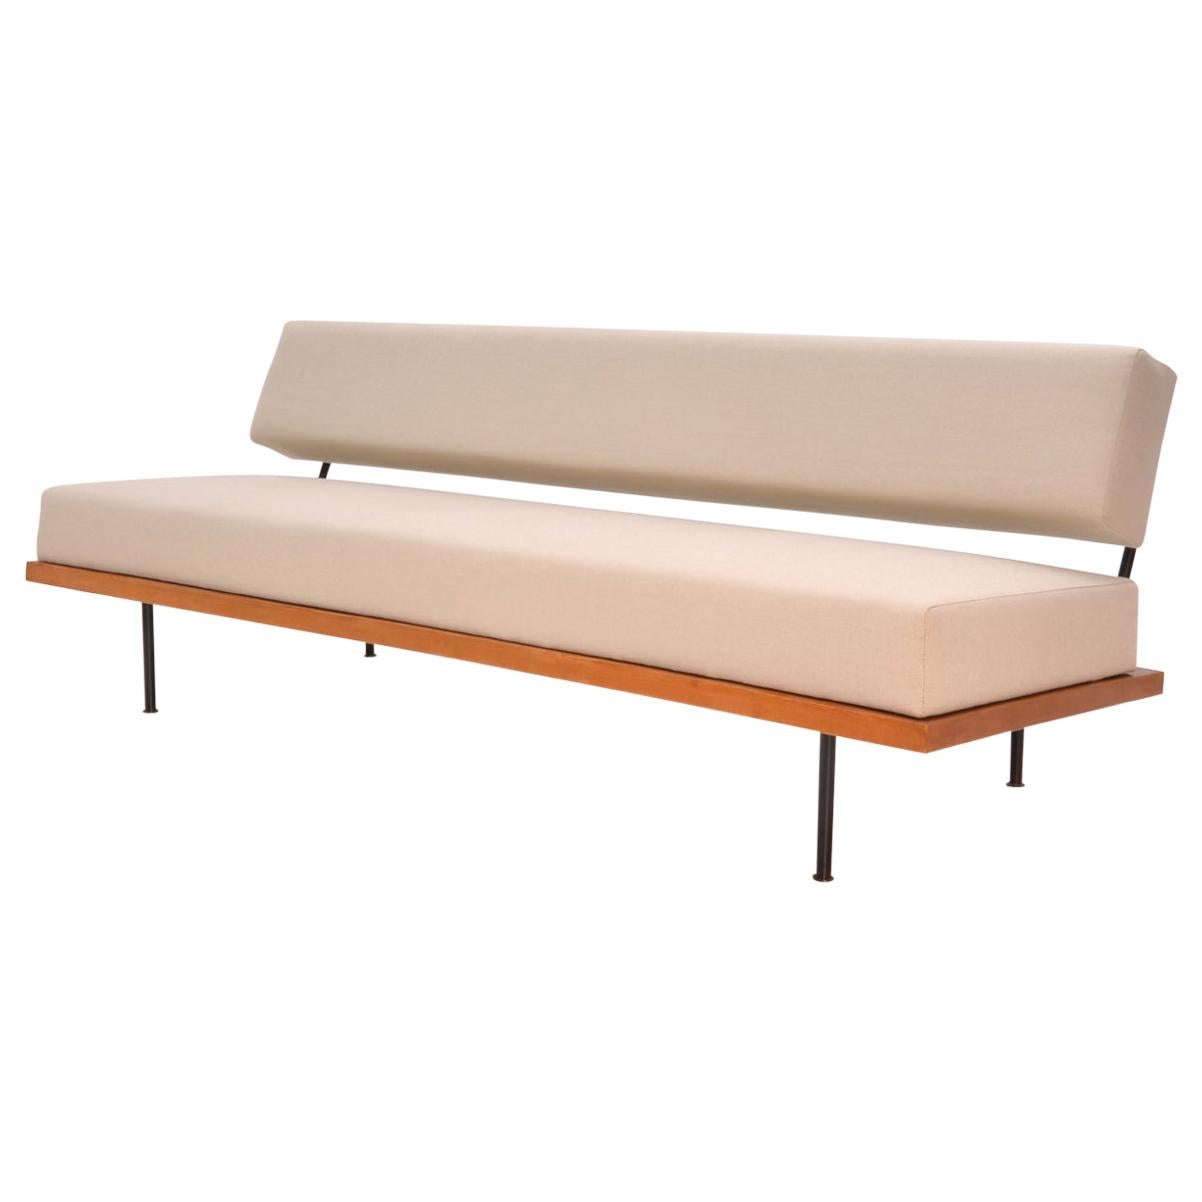 Minimalist Couch/Daybed by Florence Knoll, Wooden Frame, Reupholstered, ca. 1960